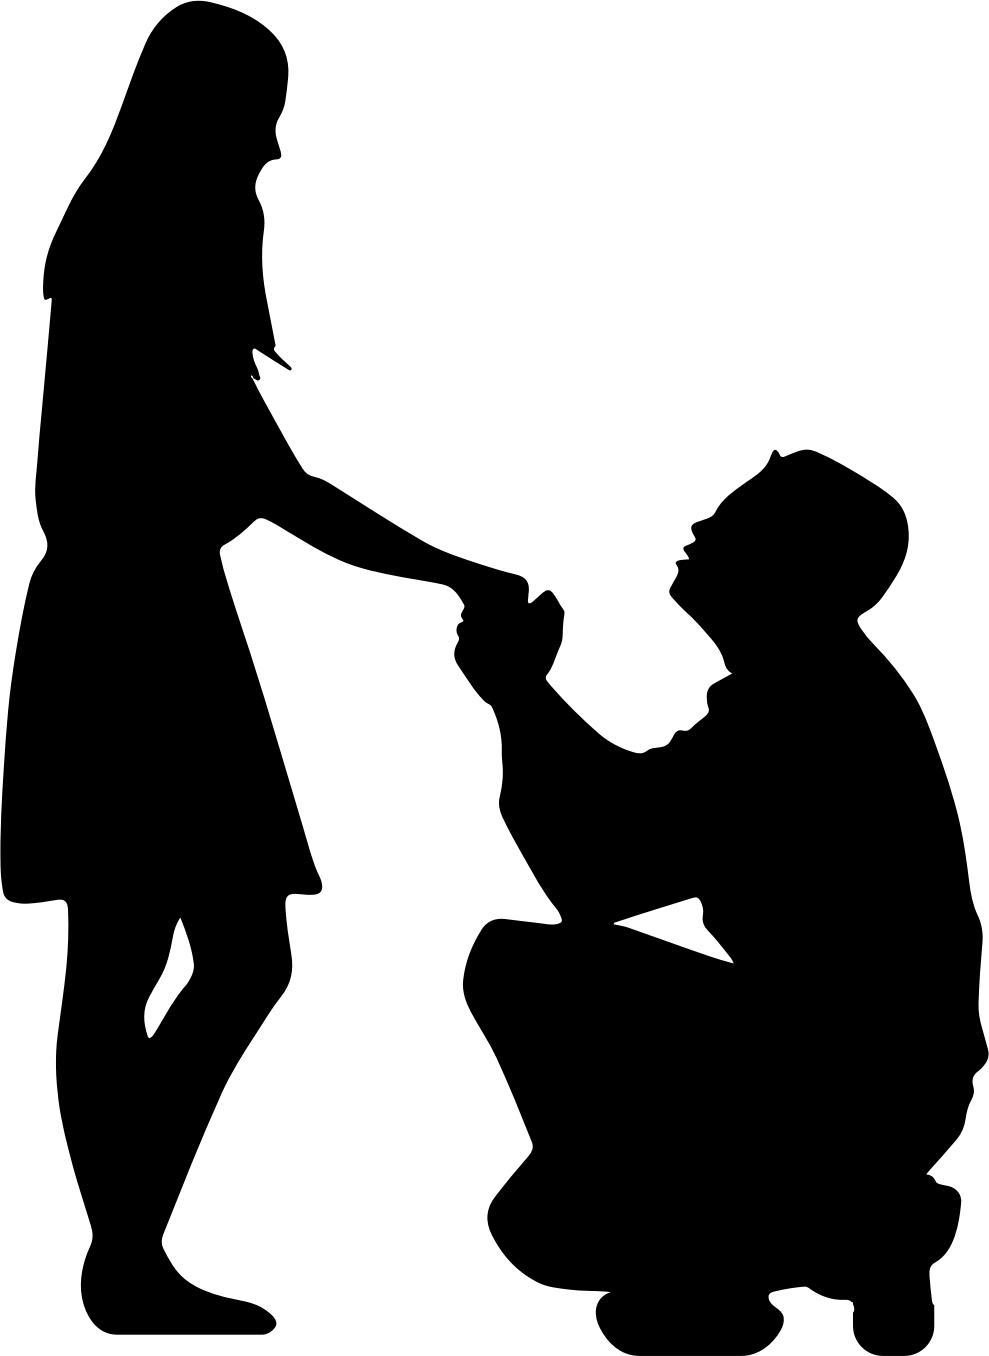 Marriage Proposal Silhouette No Ground png transparent